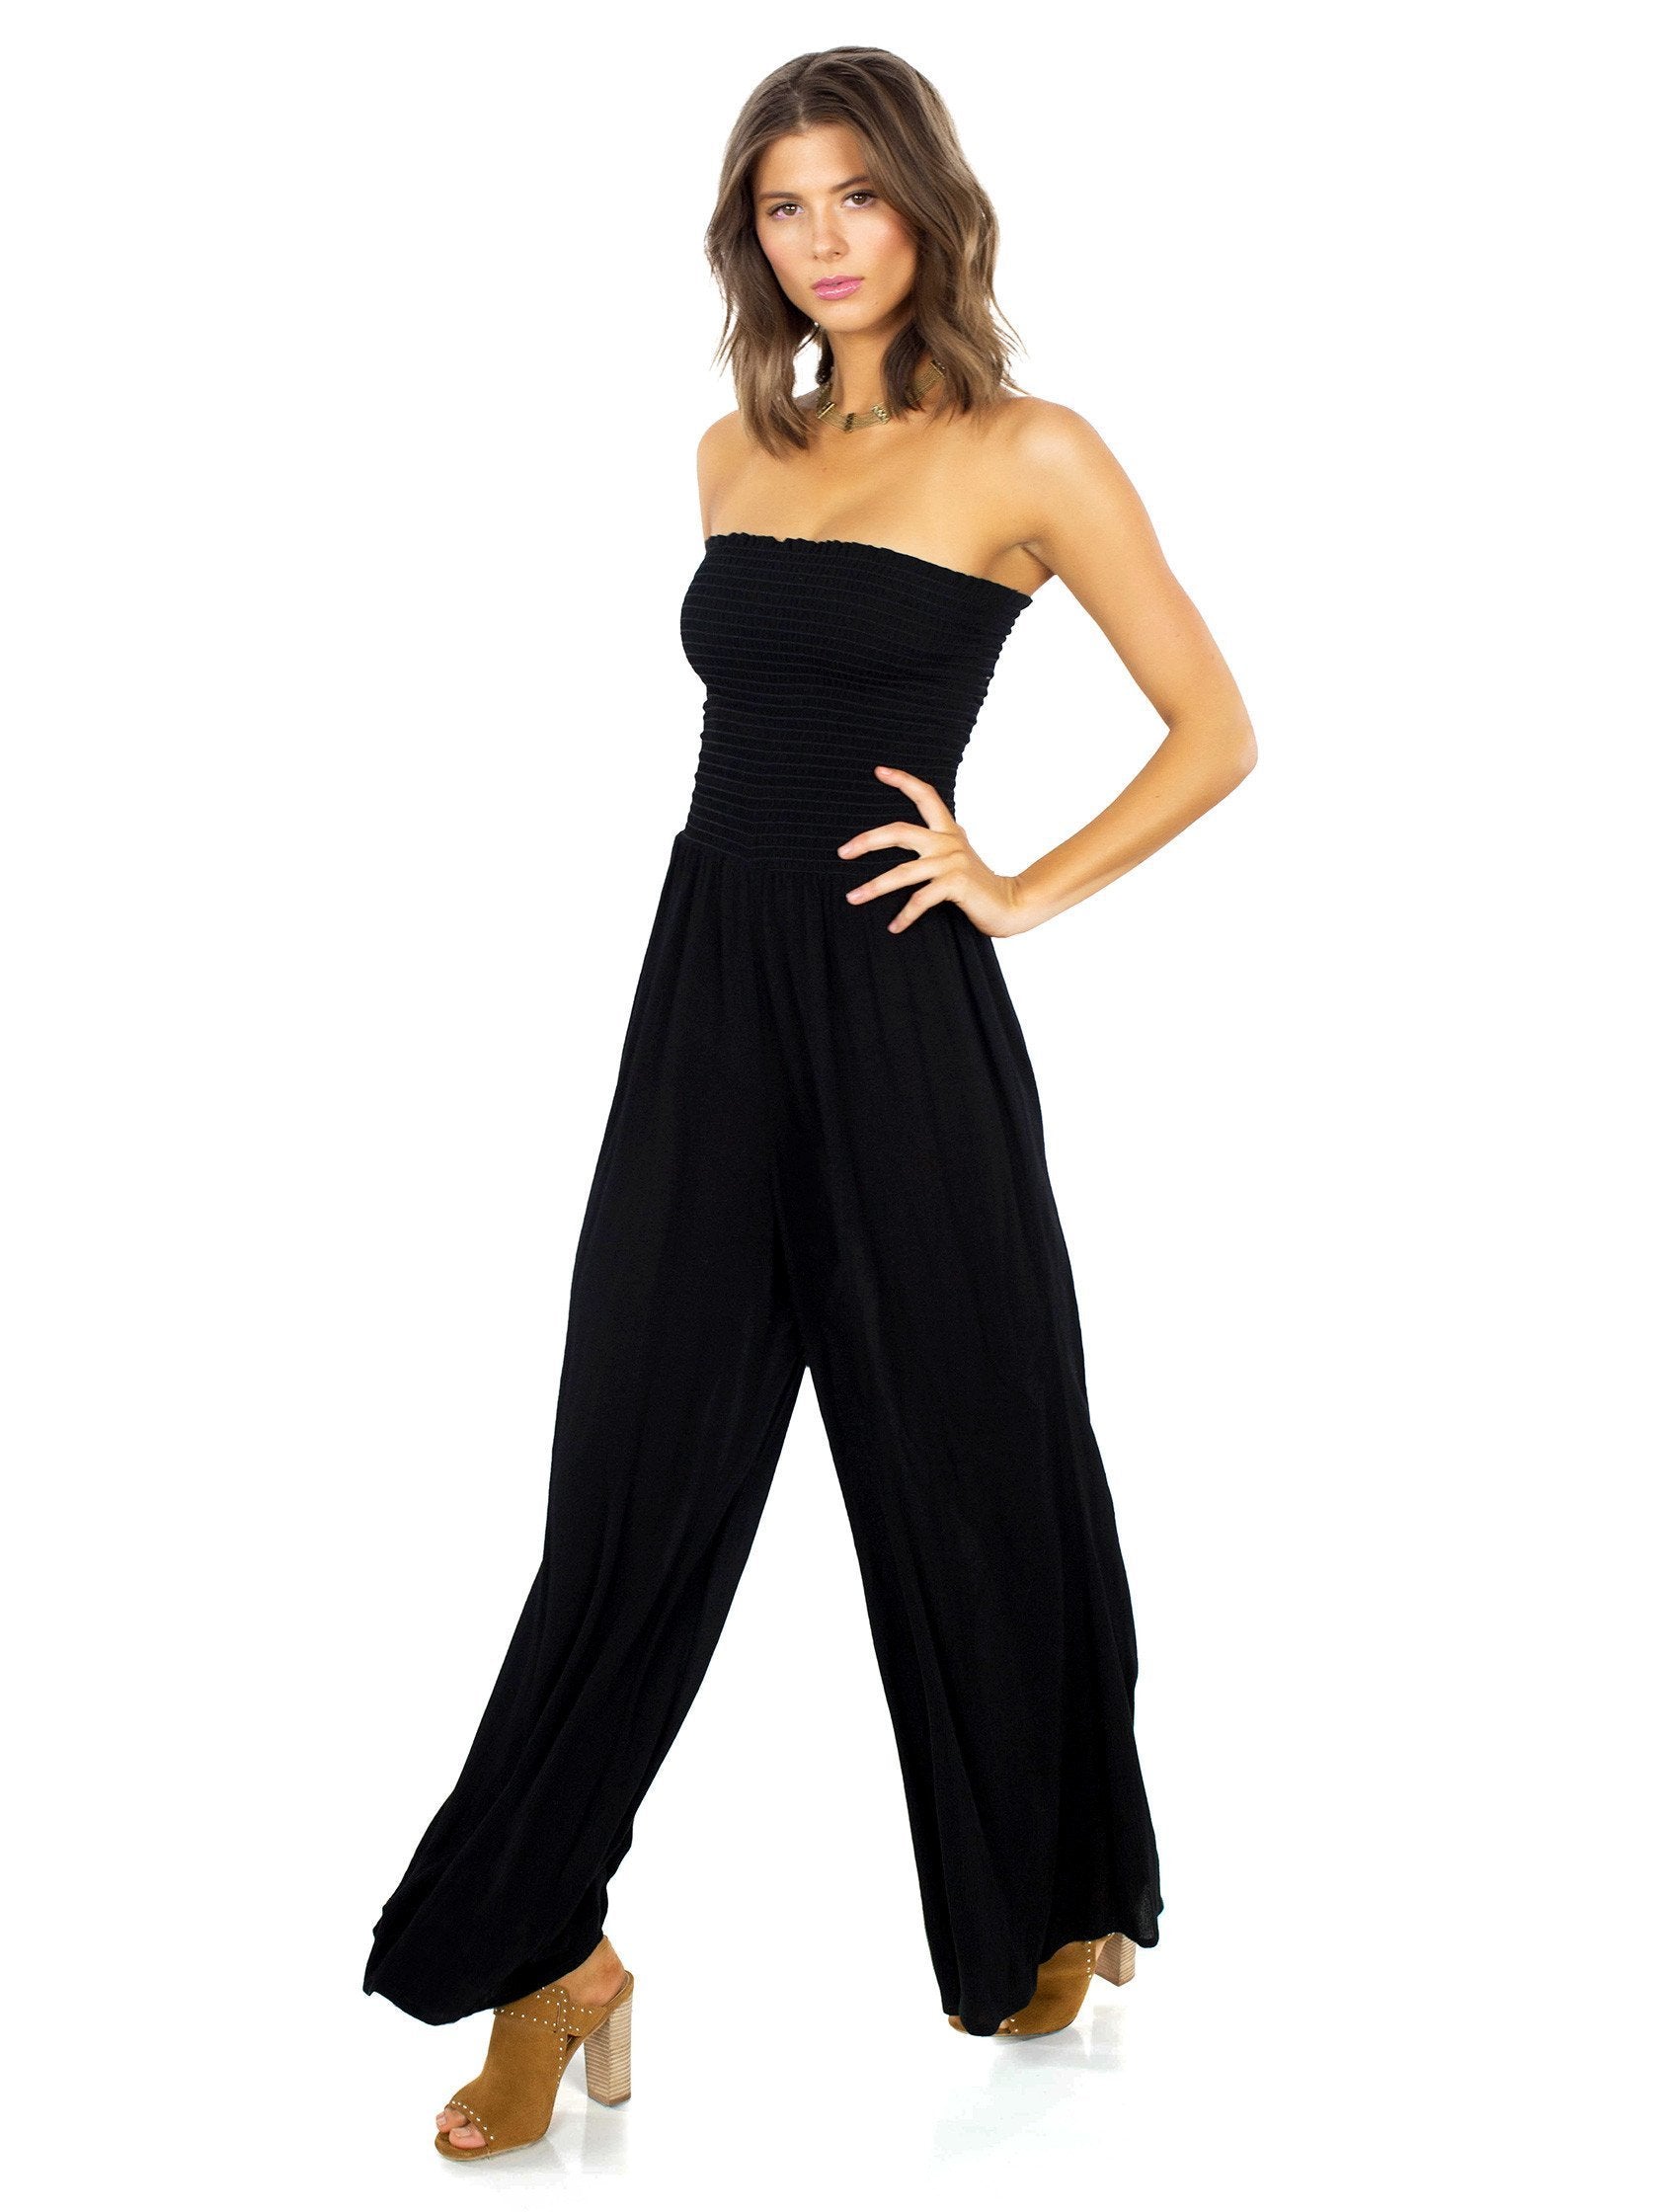 Woman wearing a jumpsuit rental from Blue Life called Smocking Bell Jumper